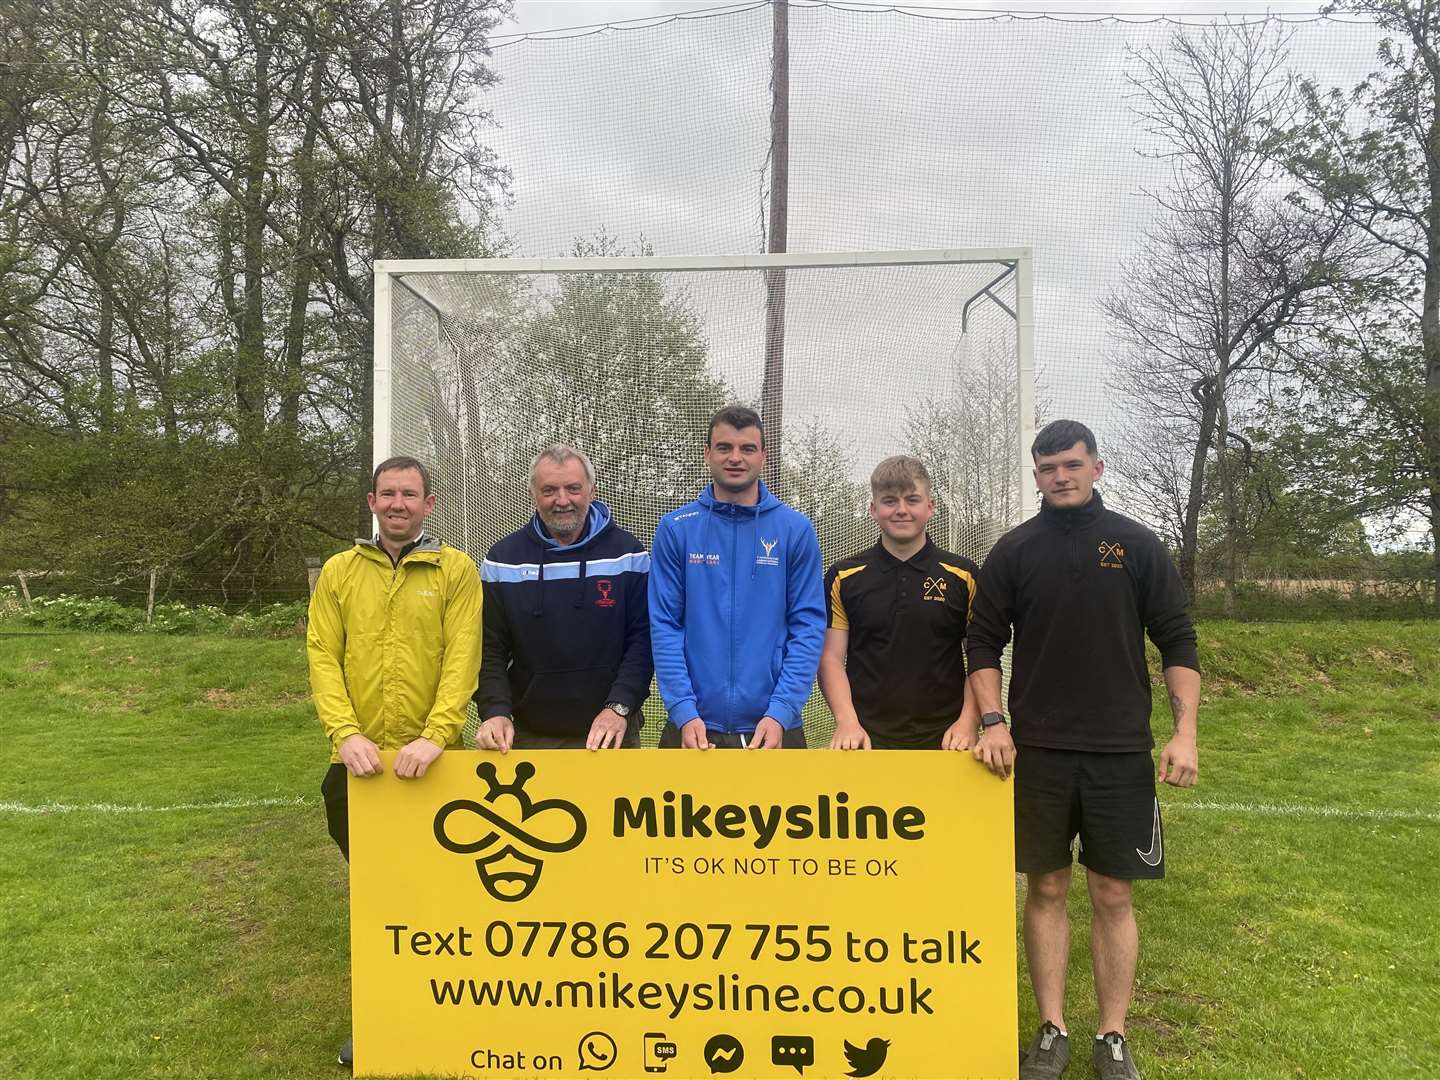 Caberfeidh Club is supporting Mikeysline with a banner at its grounds. Pictured (l-r) are Jodi Gorski, first team manager; Iain MacLean, club president; Blair Morrison, first team captain; and players Finlay Coleman and Kai McAuley.